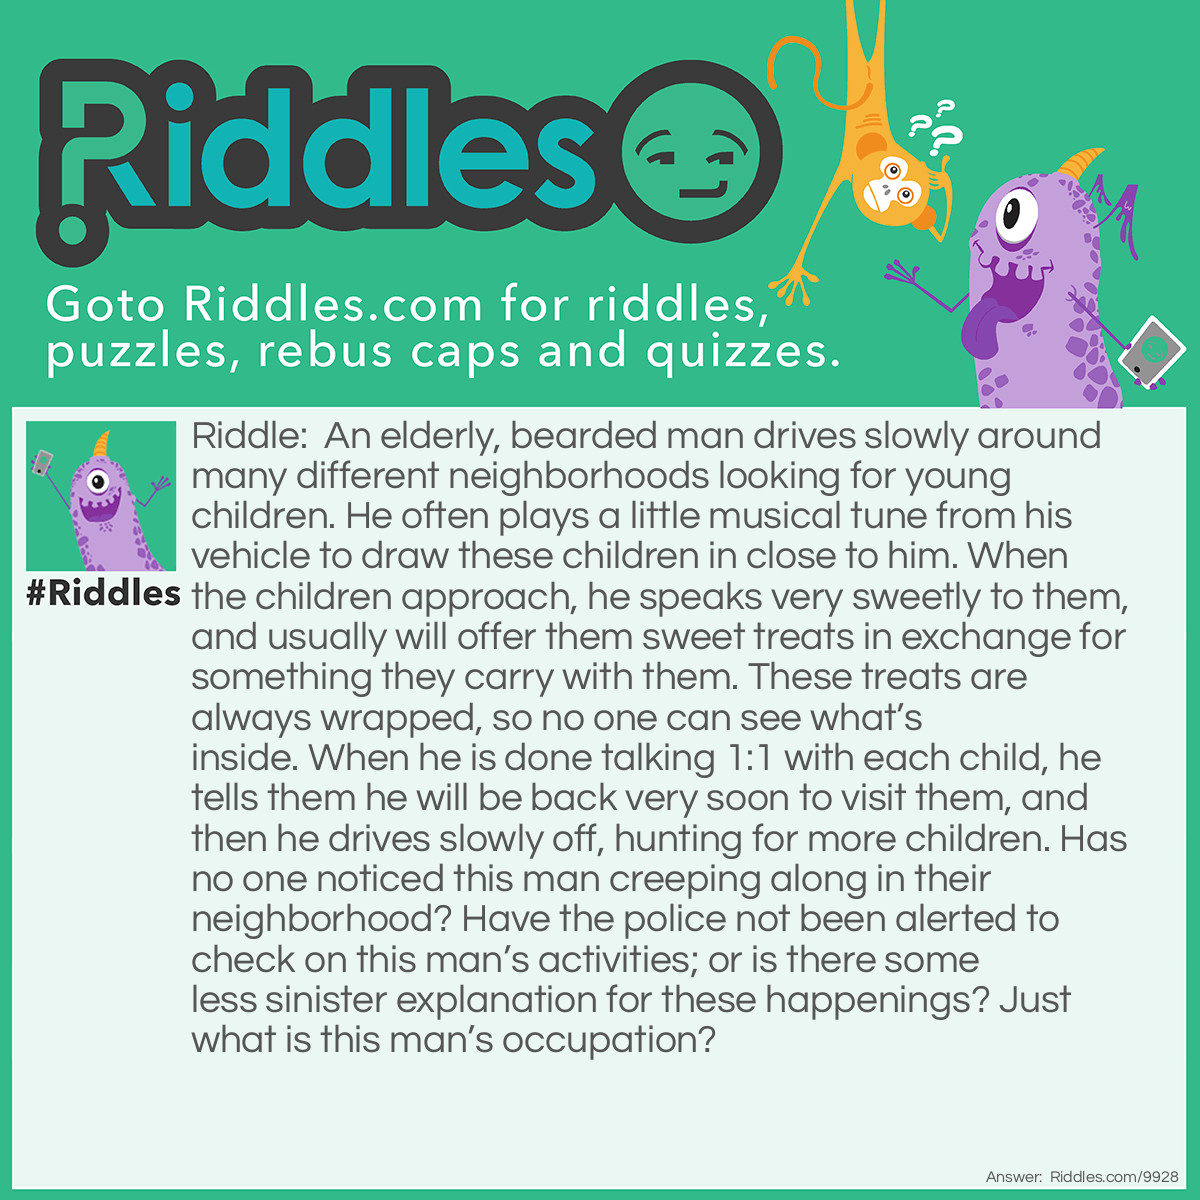 Riddle: An elderly, bearded man drives slowly around many different neighborhoods looking for young children. He often plays a little musical tune from his vehicle to draw these children in close to him. When the children approach, he speaks very sweetly to them, and usually will offer them sweet treats in exchange for something they carry with them. These treats are always wrapped, so no one can see what's inside. When he is done talking 1:1 with each child, he tells them he will be back very soon to visit them, and then he drives slowly off, hunting for more children. Has no one noticed this man creeping along in their neighborhood? Have the police not been alerted to check on this man's activities; or is there some less sinister explanation for these happenings? Just what is this man's occupation? Answer: He works as an ice cream man, driving his truck to various neighborhoods and selling his cold treats.